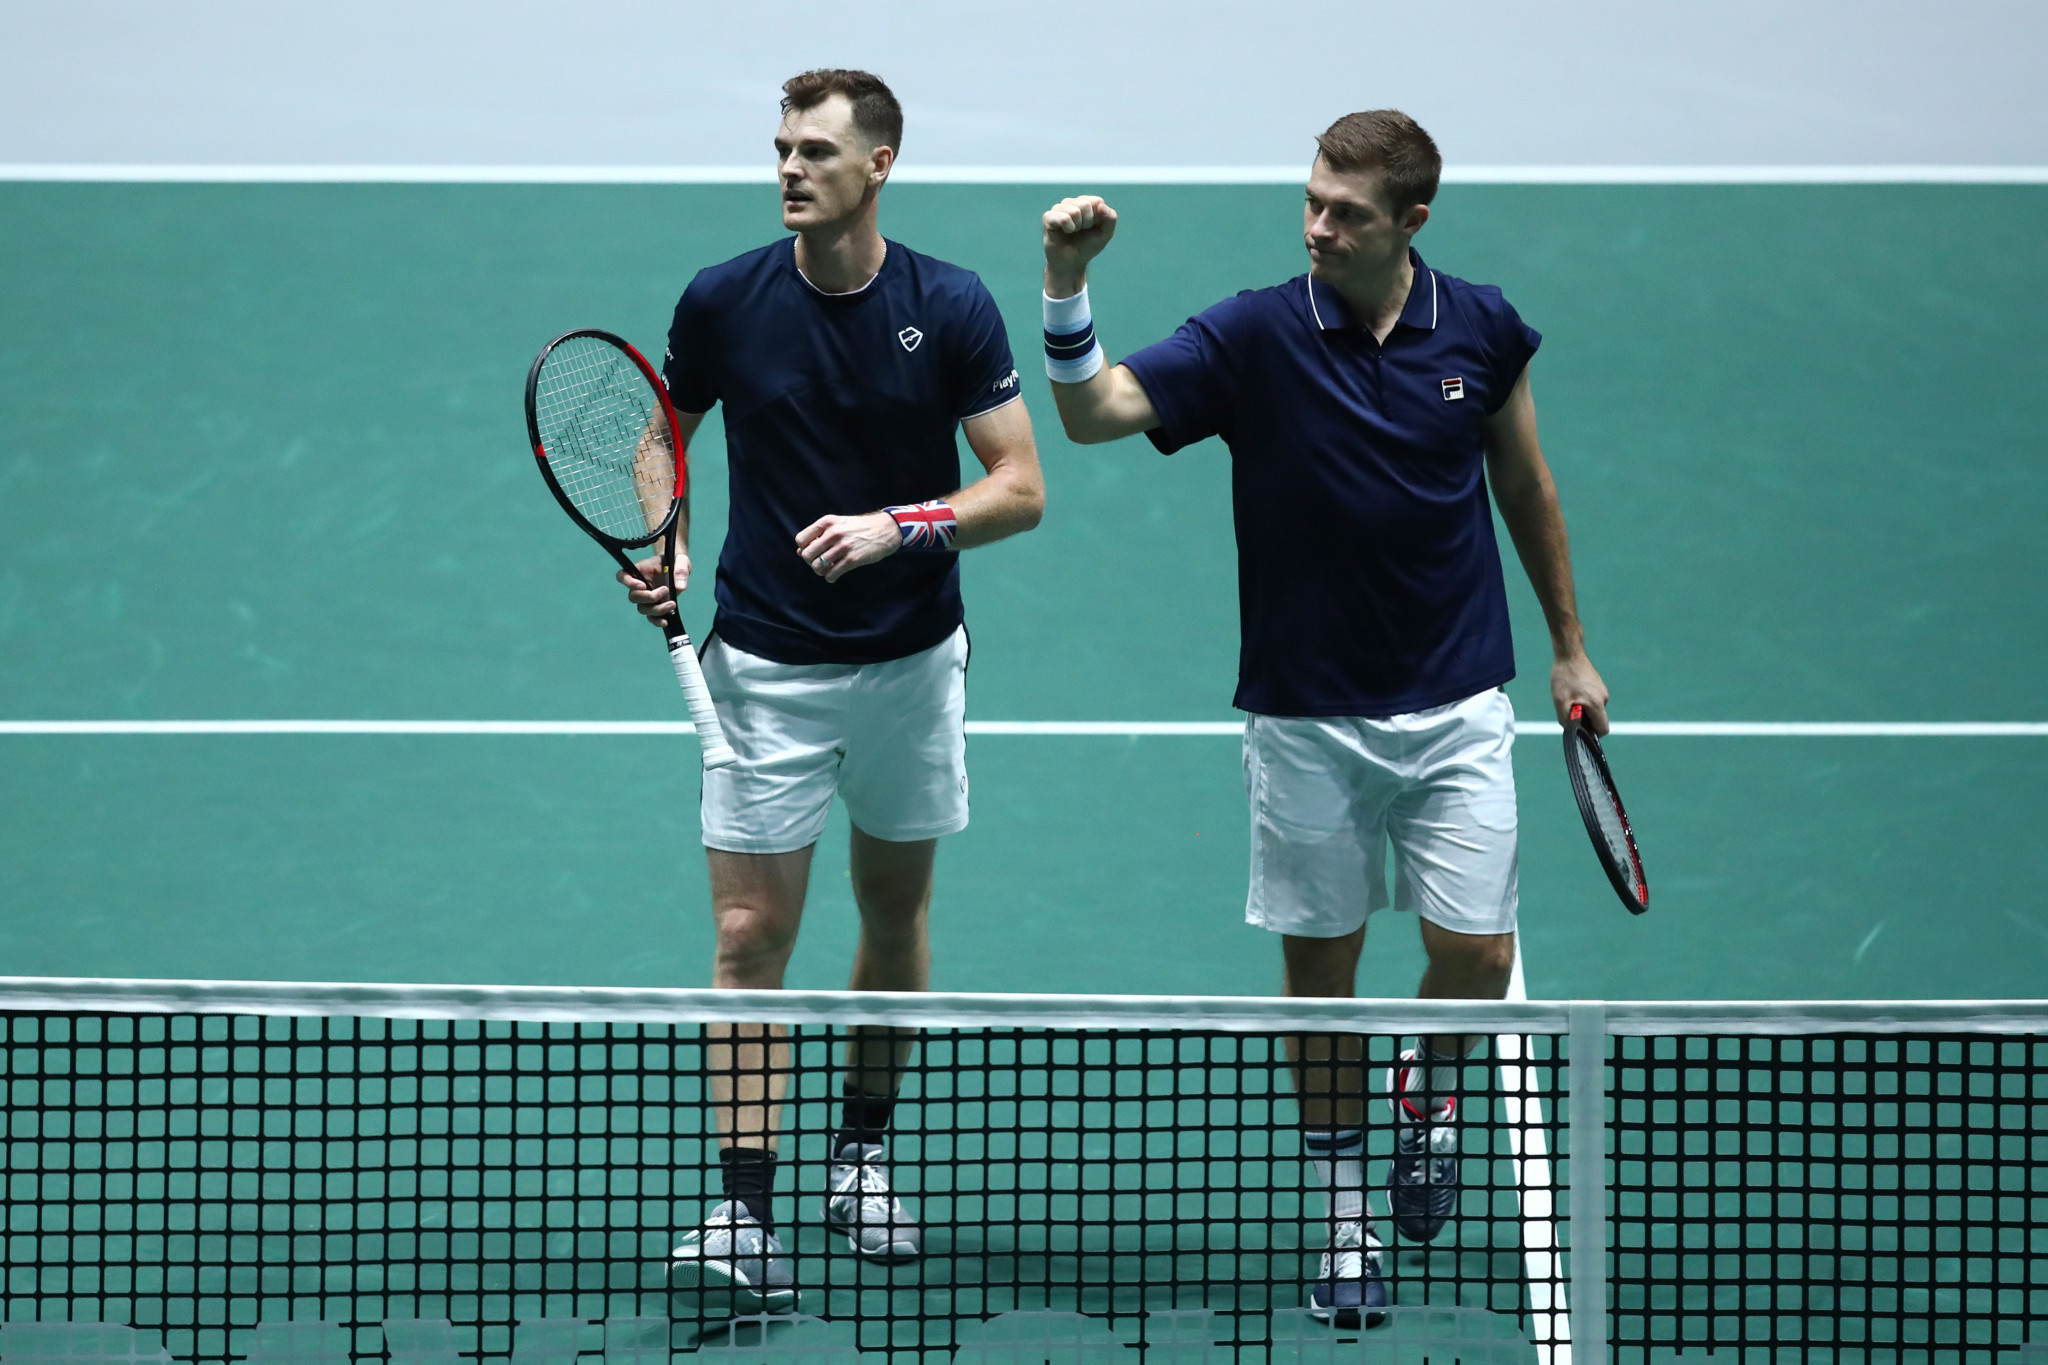 Great Britain's Jamie Murray and Neal Skupski won their pivotal doubles match to clinch victory over Kazakhstan ©Getty Images